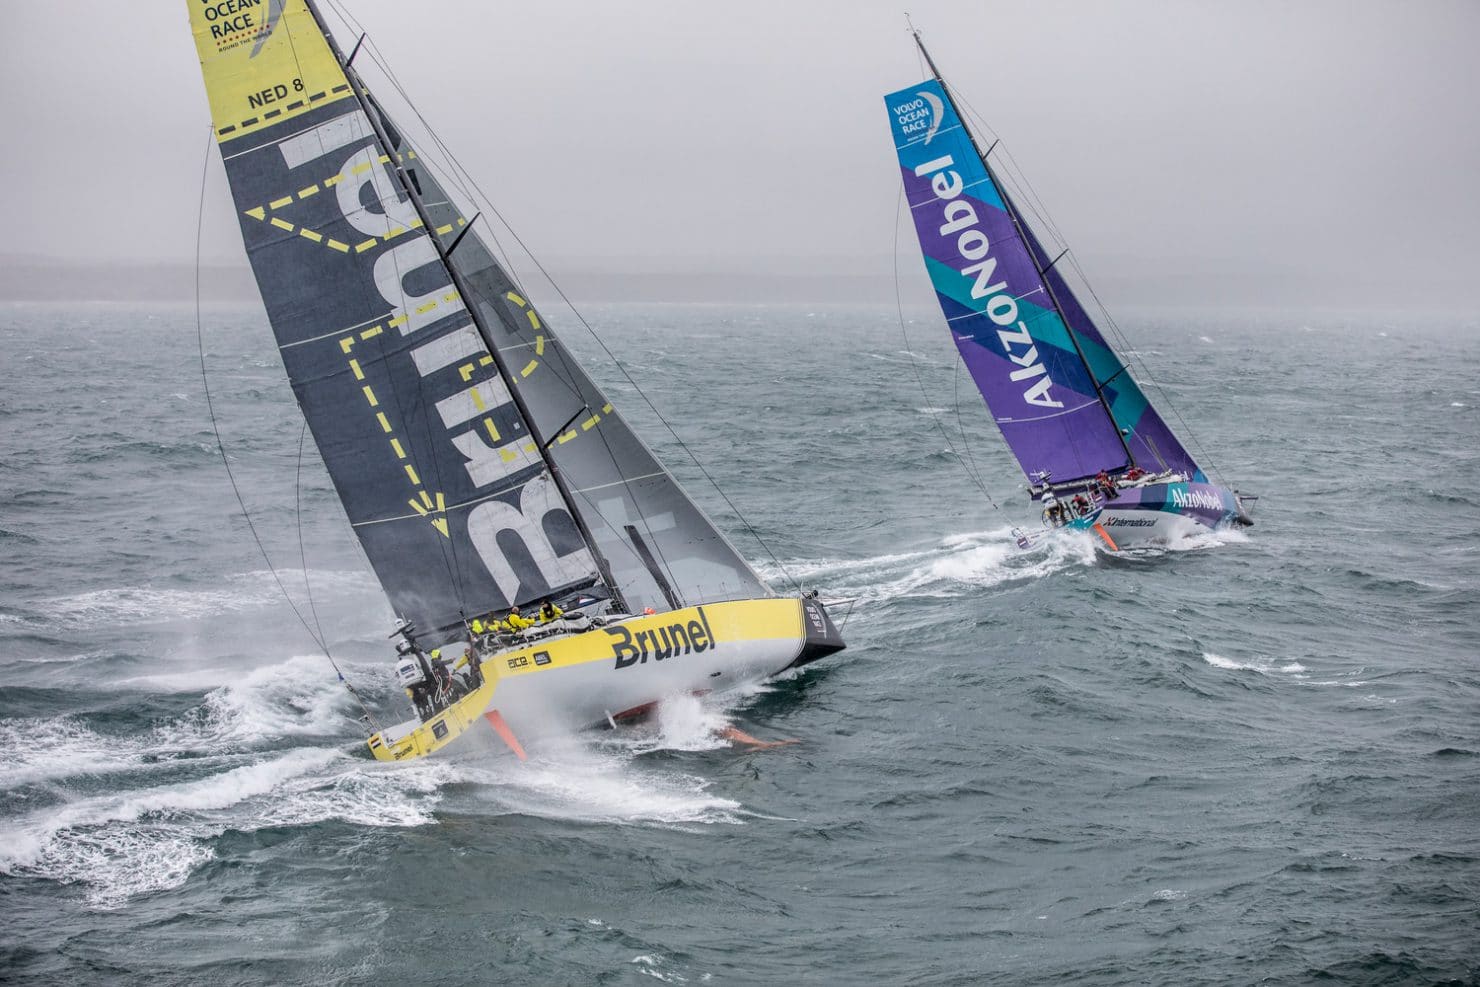 2017-18, Aerial, AkzoNobel, Around the Island Race, Commercial, Gosport, Helicopter, Inmarsat, Kind of picture, Leg Zero, On board, On-board, Pre-race, Race Partners, Rough weather, Team Brunel